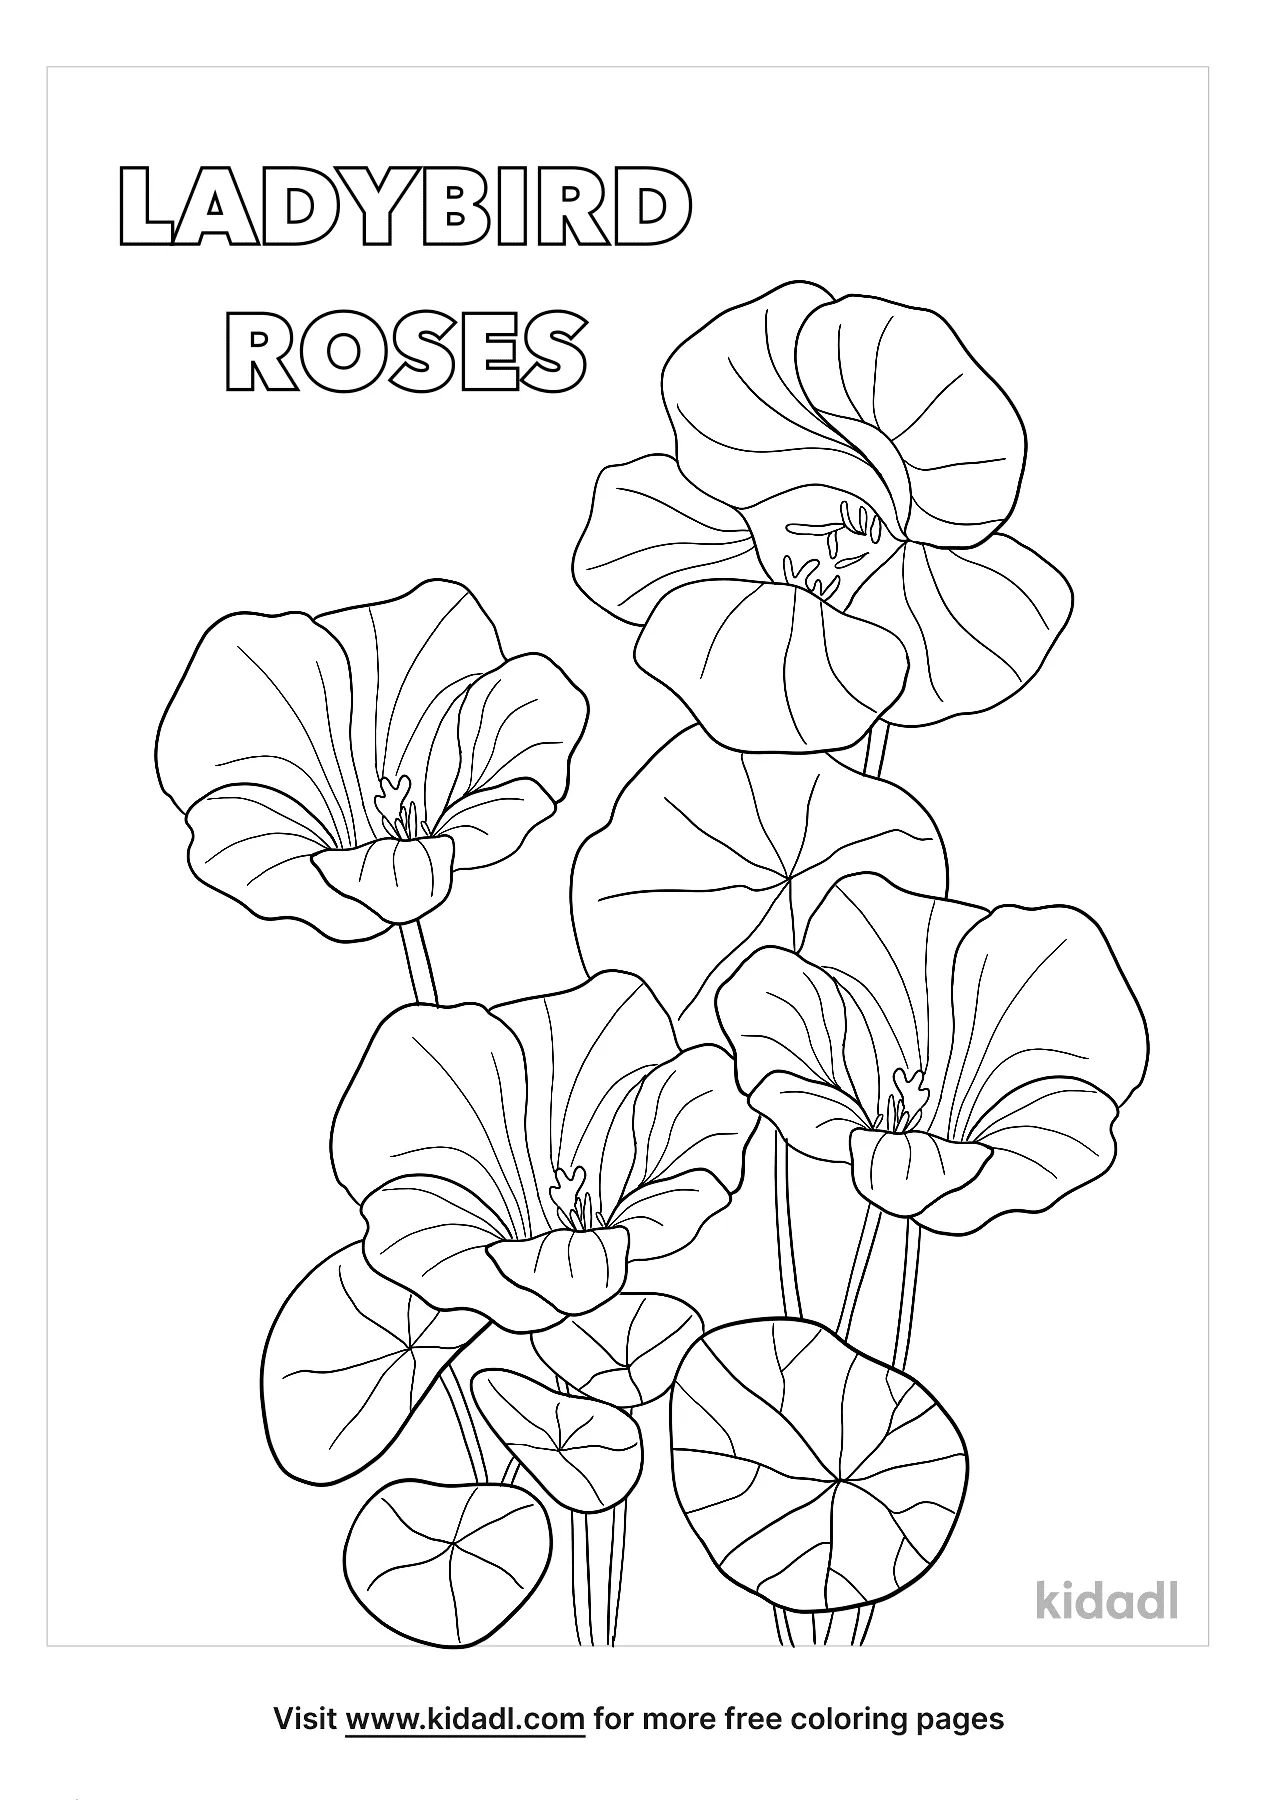 wood violet coloring pages